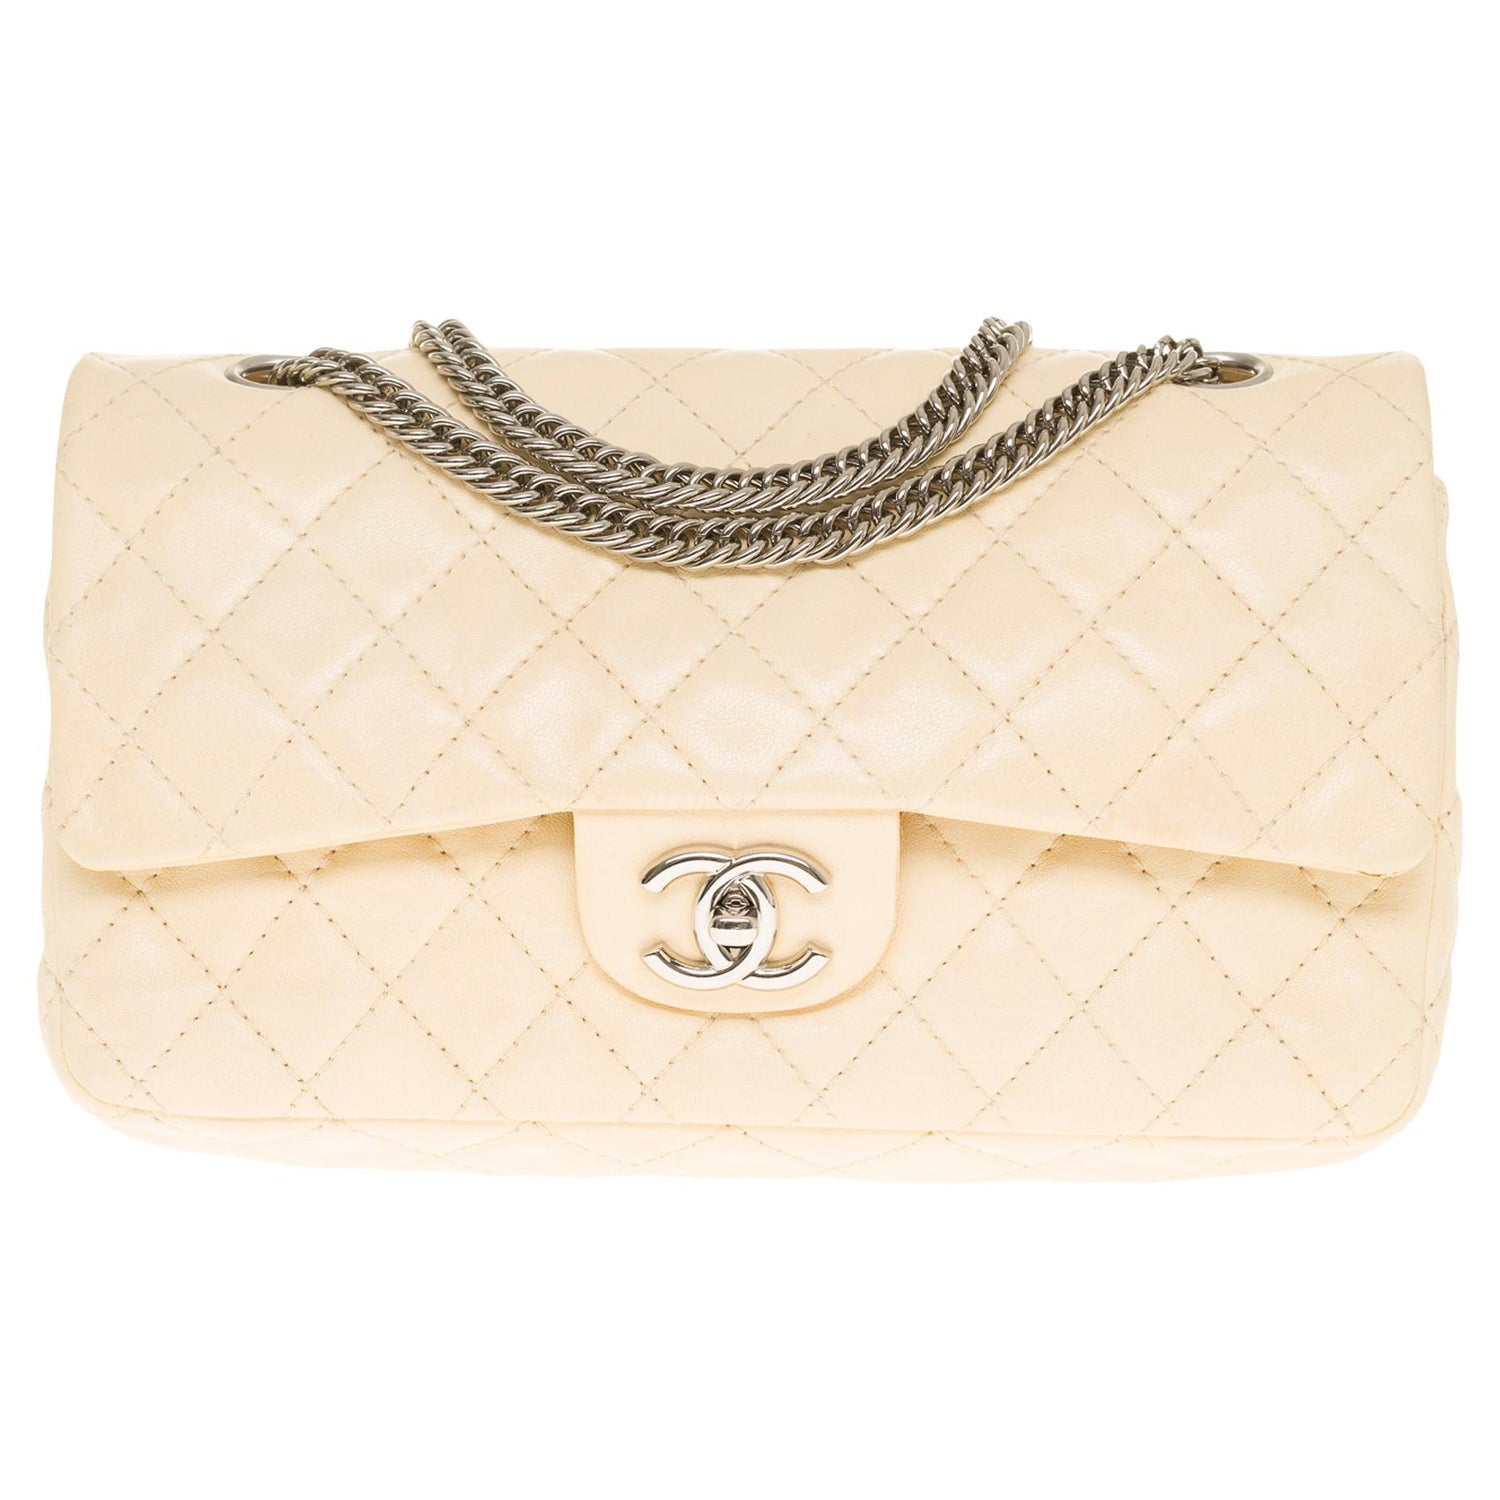 Timeless/classique leather handbag Chanel White in Leather - 35129992